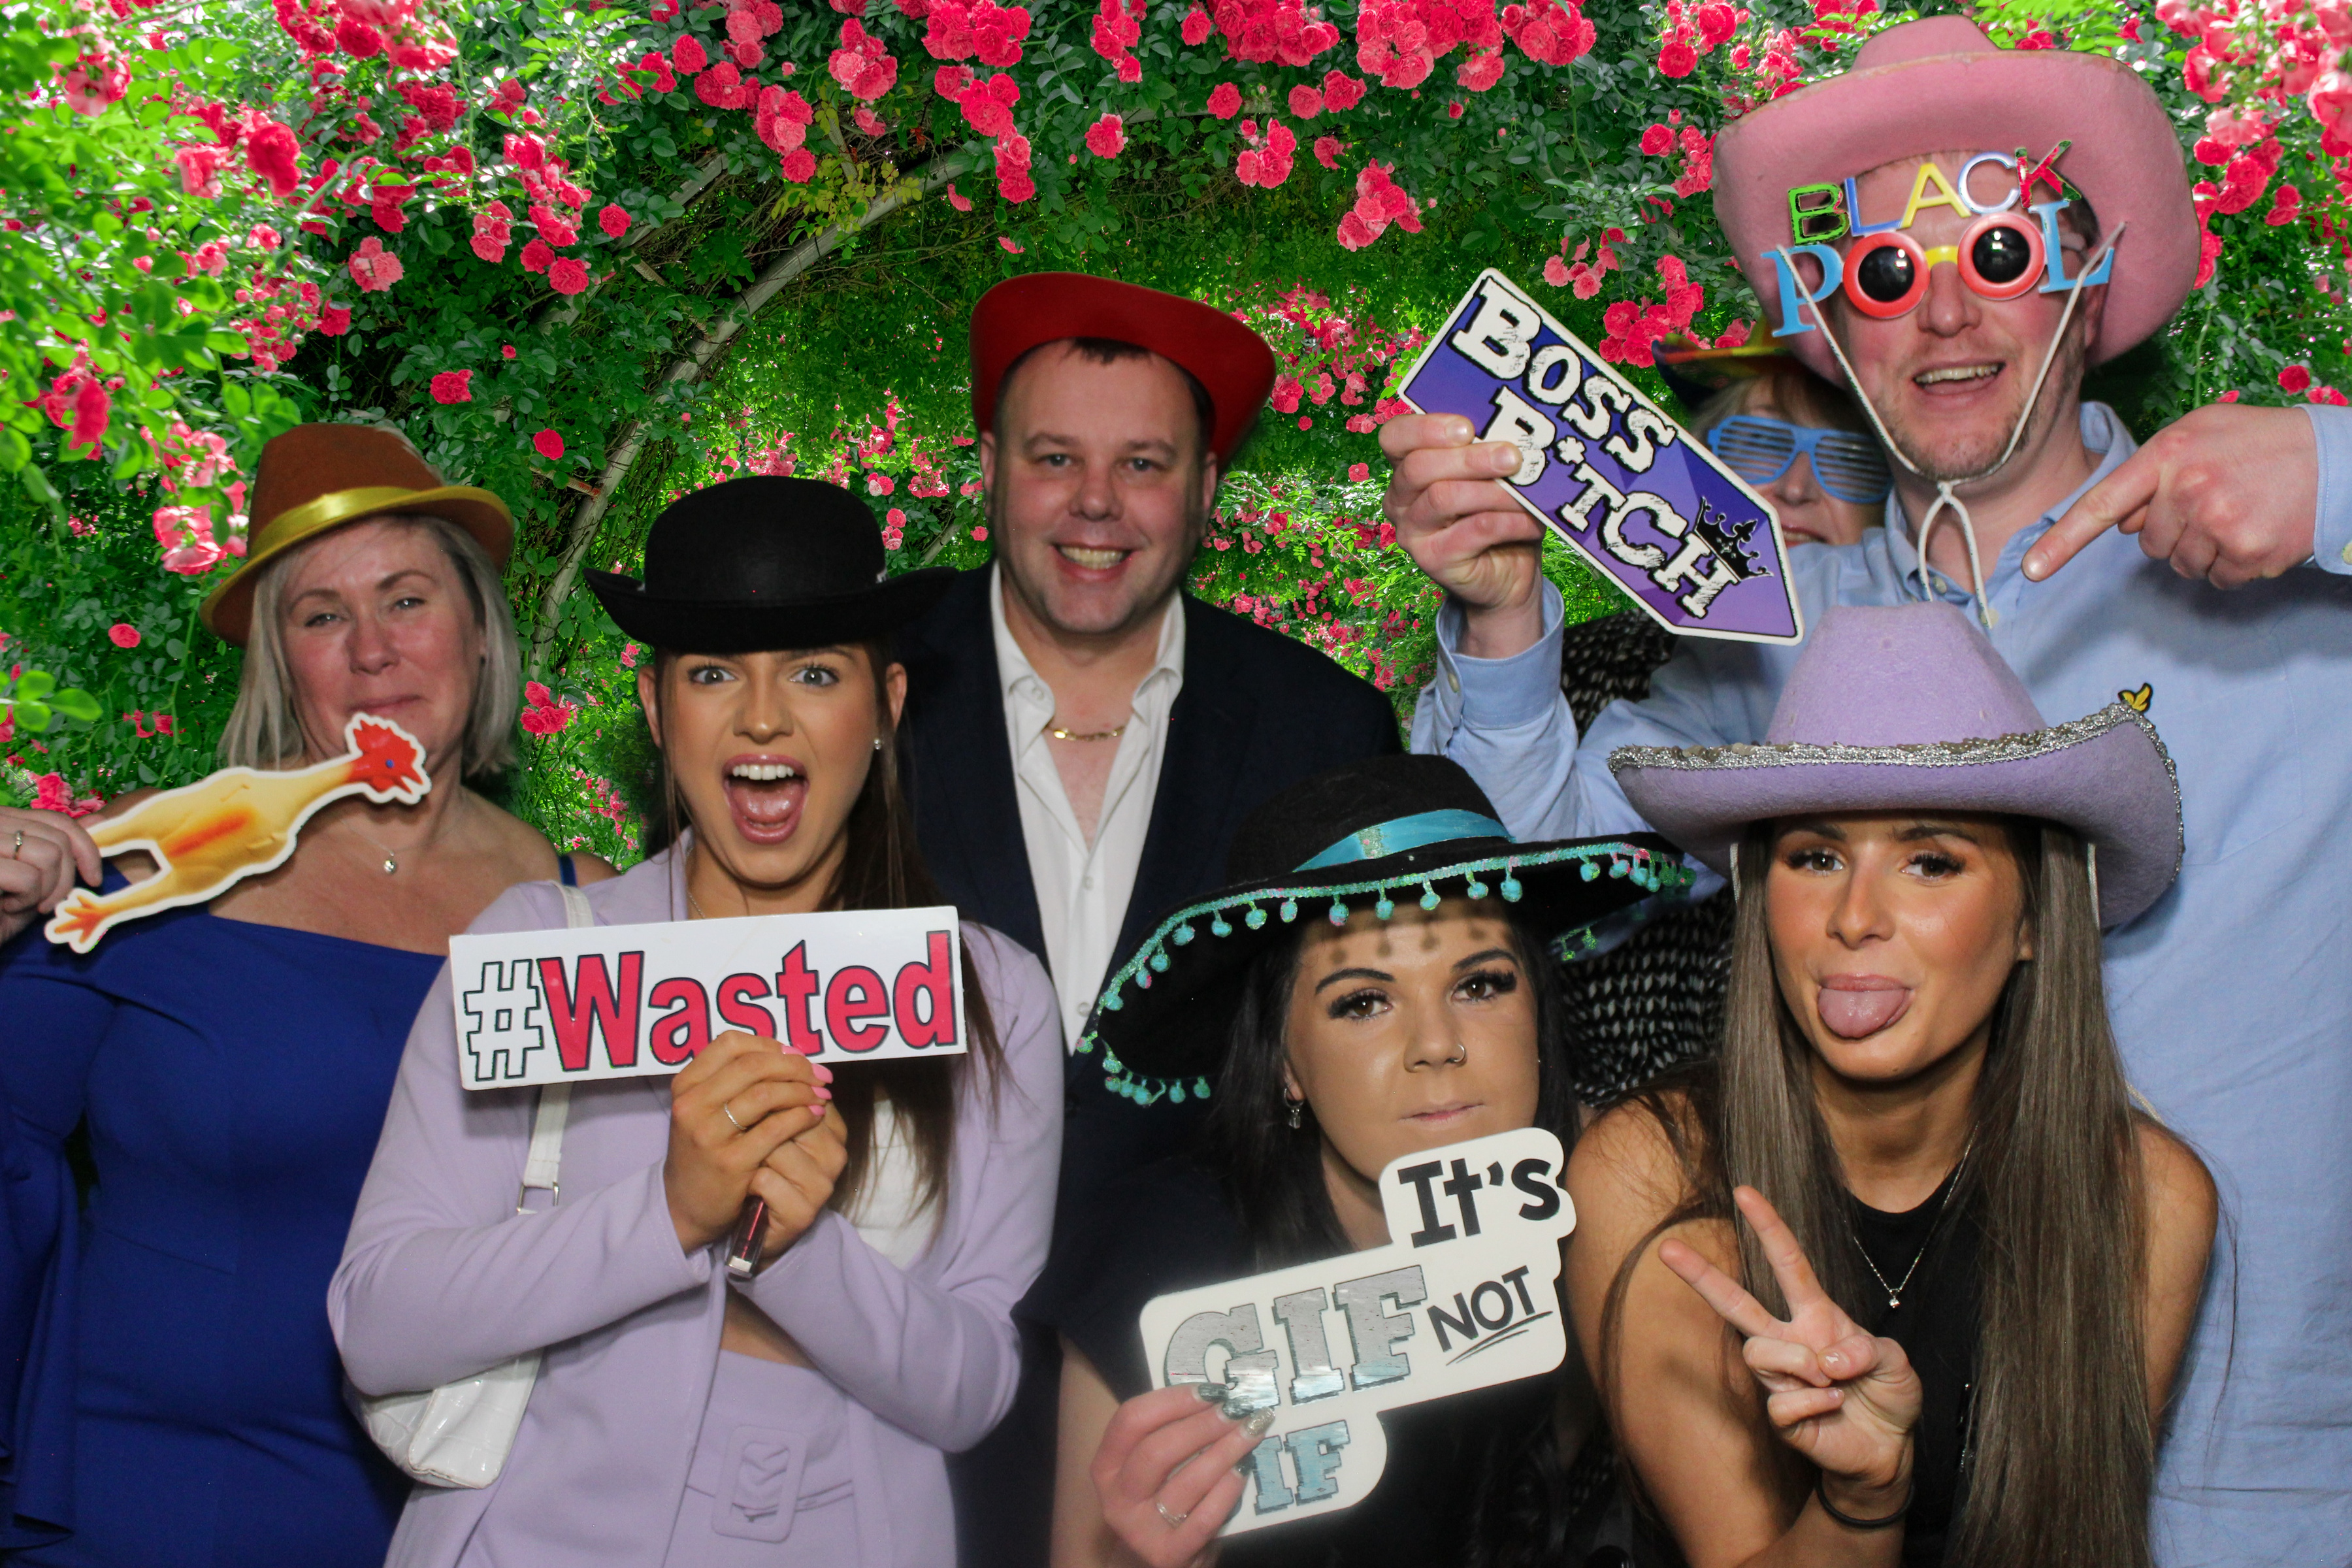 Blackpool photo booth hire in the garden